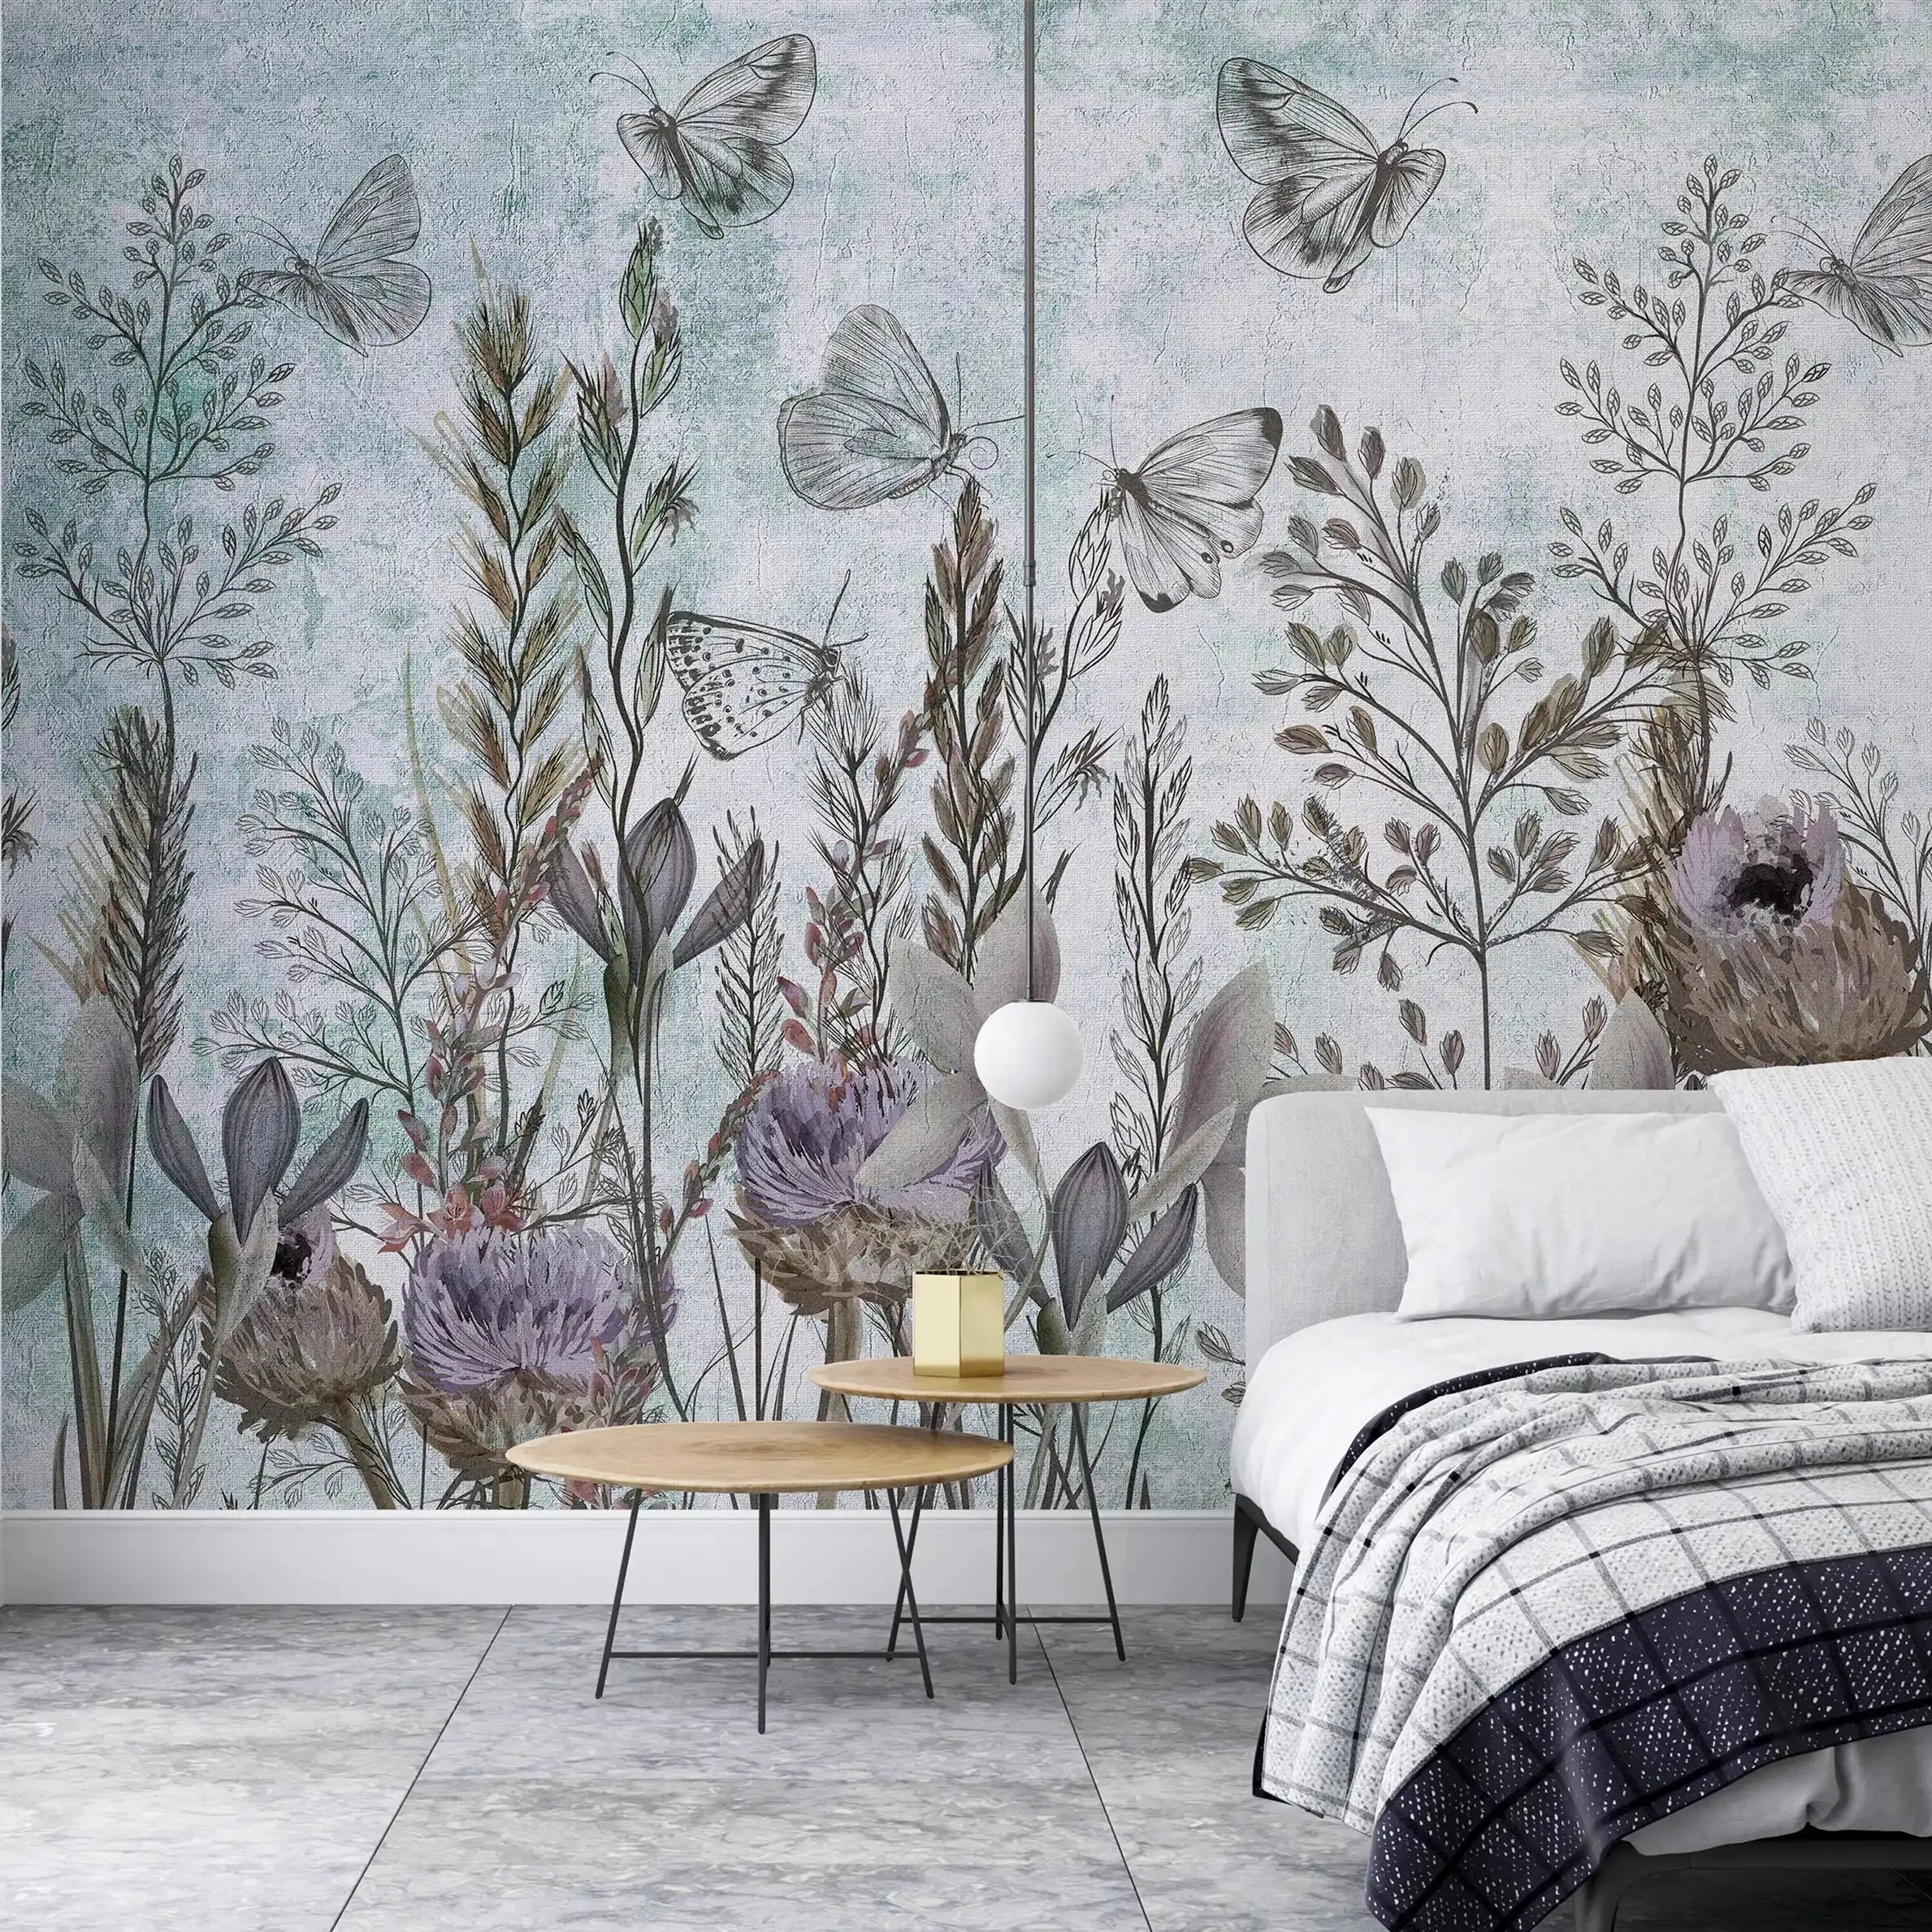 3044-C / Modern Tropical Wallpaper - Peel and Stick, Removable Botanical Design with Muted Whimsy Flowers, Ideal for Bedroom, Bathroom & Kitchen Wall Decor - Artevella